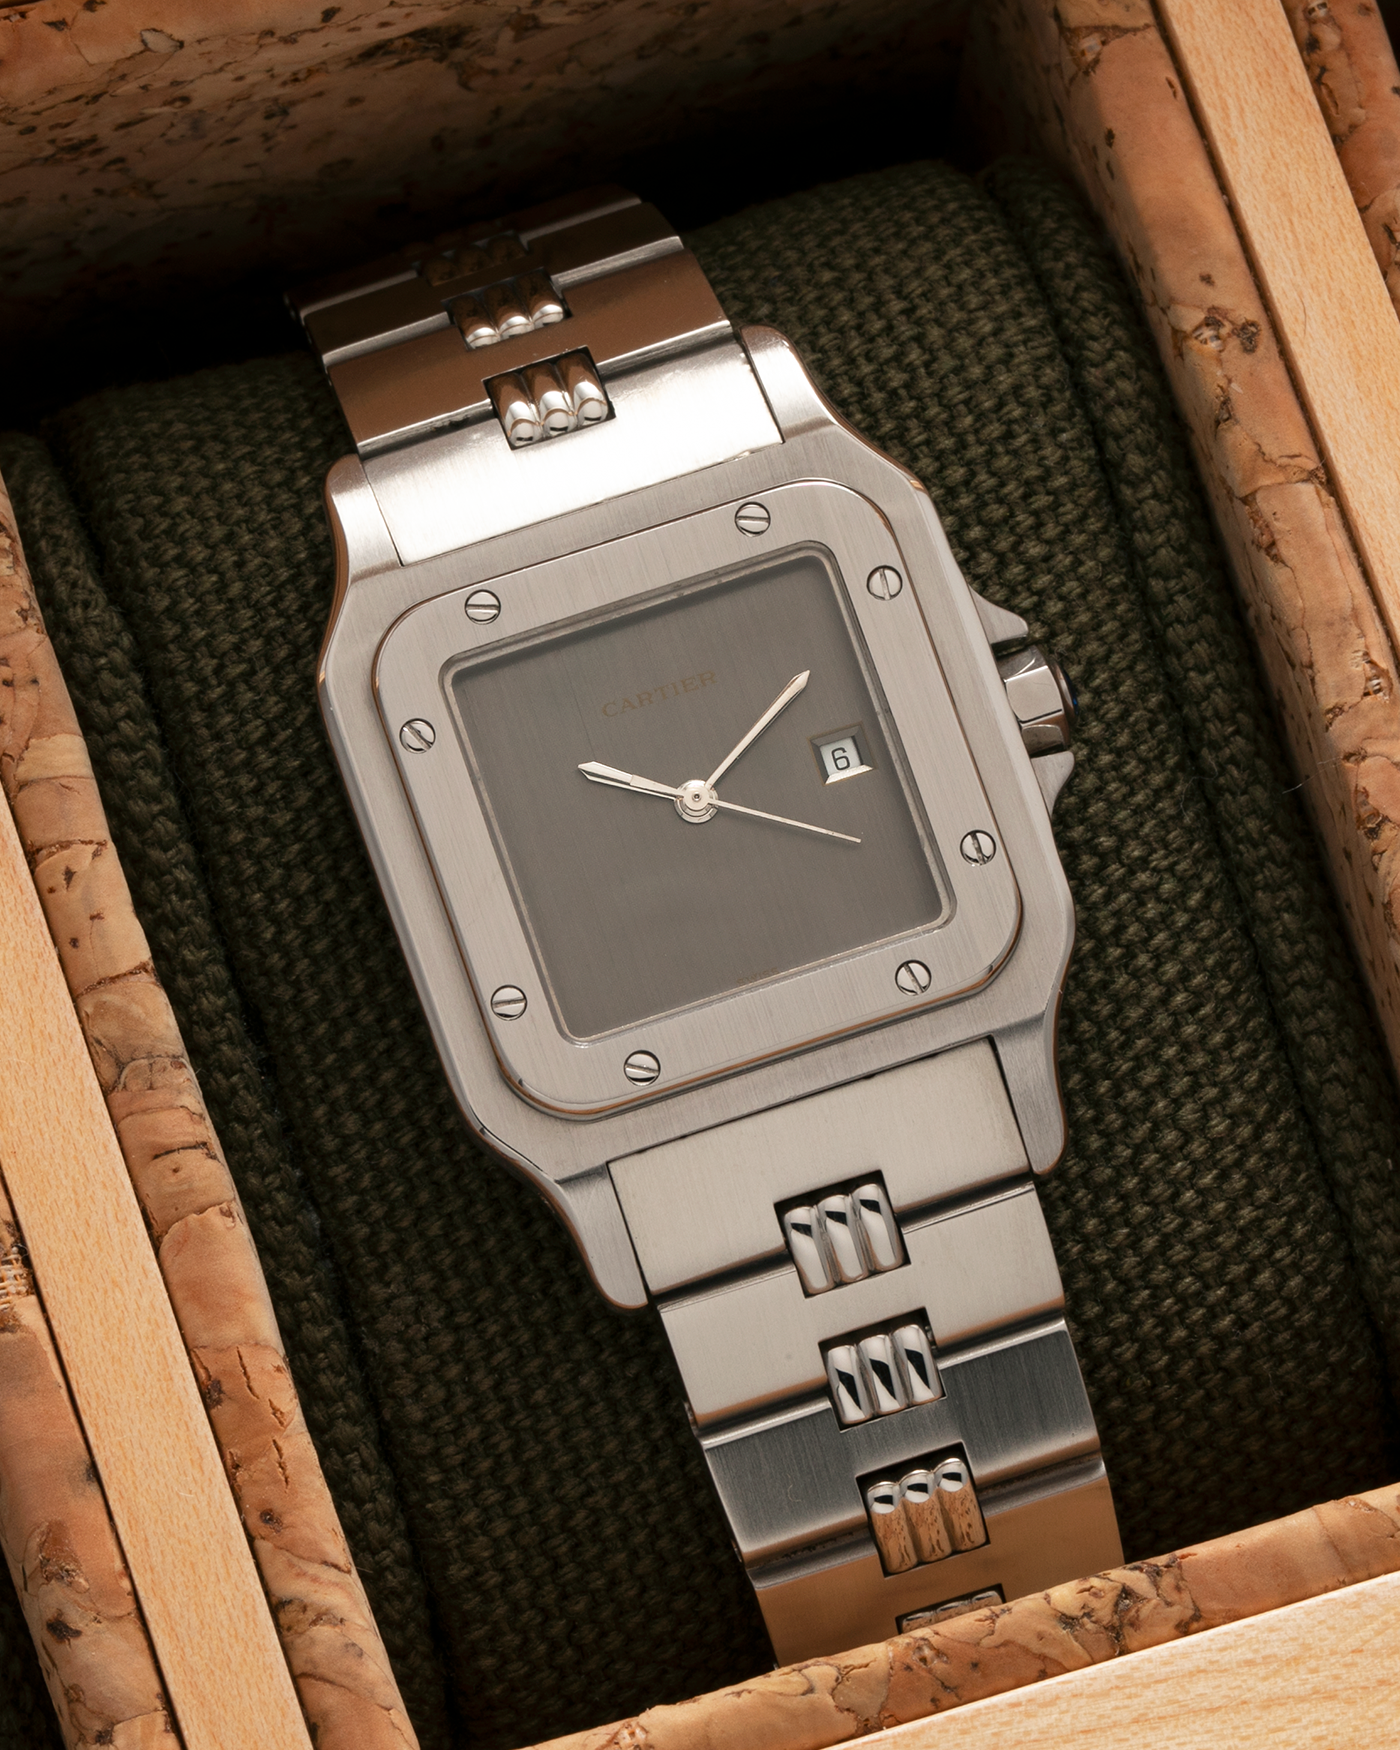 Brand: Cartier Year: 1980s Model: Santos ‘Carrée’ Reference: 2960 Material: Stainless Steel Movement: Cartier Cal. 077 (ETA Cal. 3671 Based), Self-Winding Case Dimensions: 29mm x 40.5mm Lug Width: 18mm Strap: Cartier Stainless Steel Godron ‘541811’ Bracelet with Signed Clasp